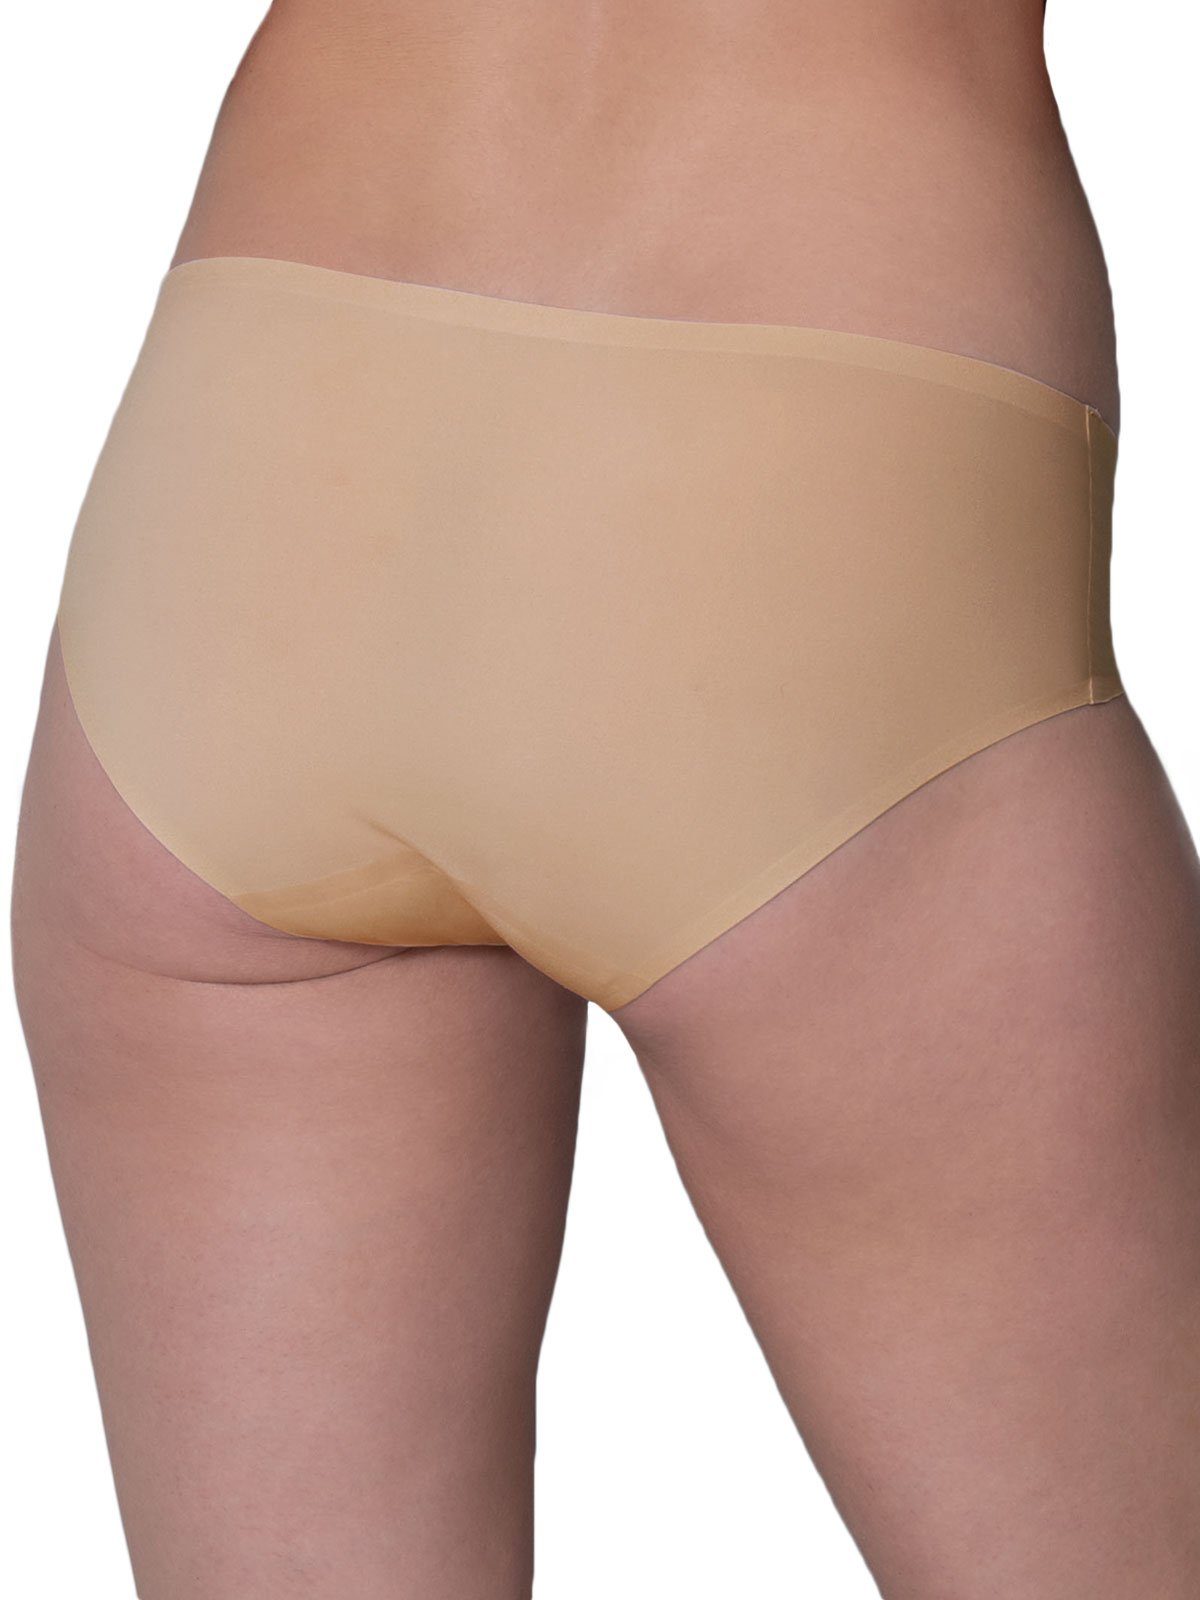 Rosa Faia extra 2-St) desert 2er Nähte Hipster Essential flache Pack (Packung, Panty